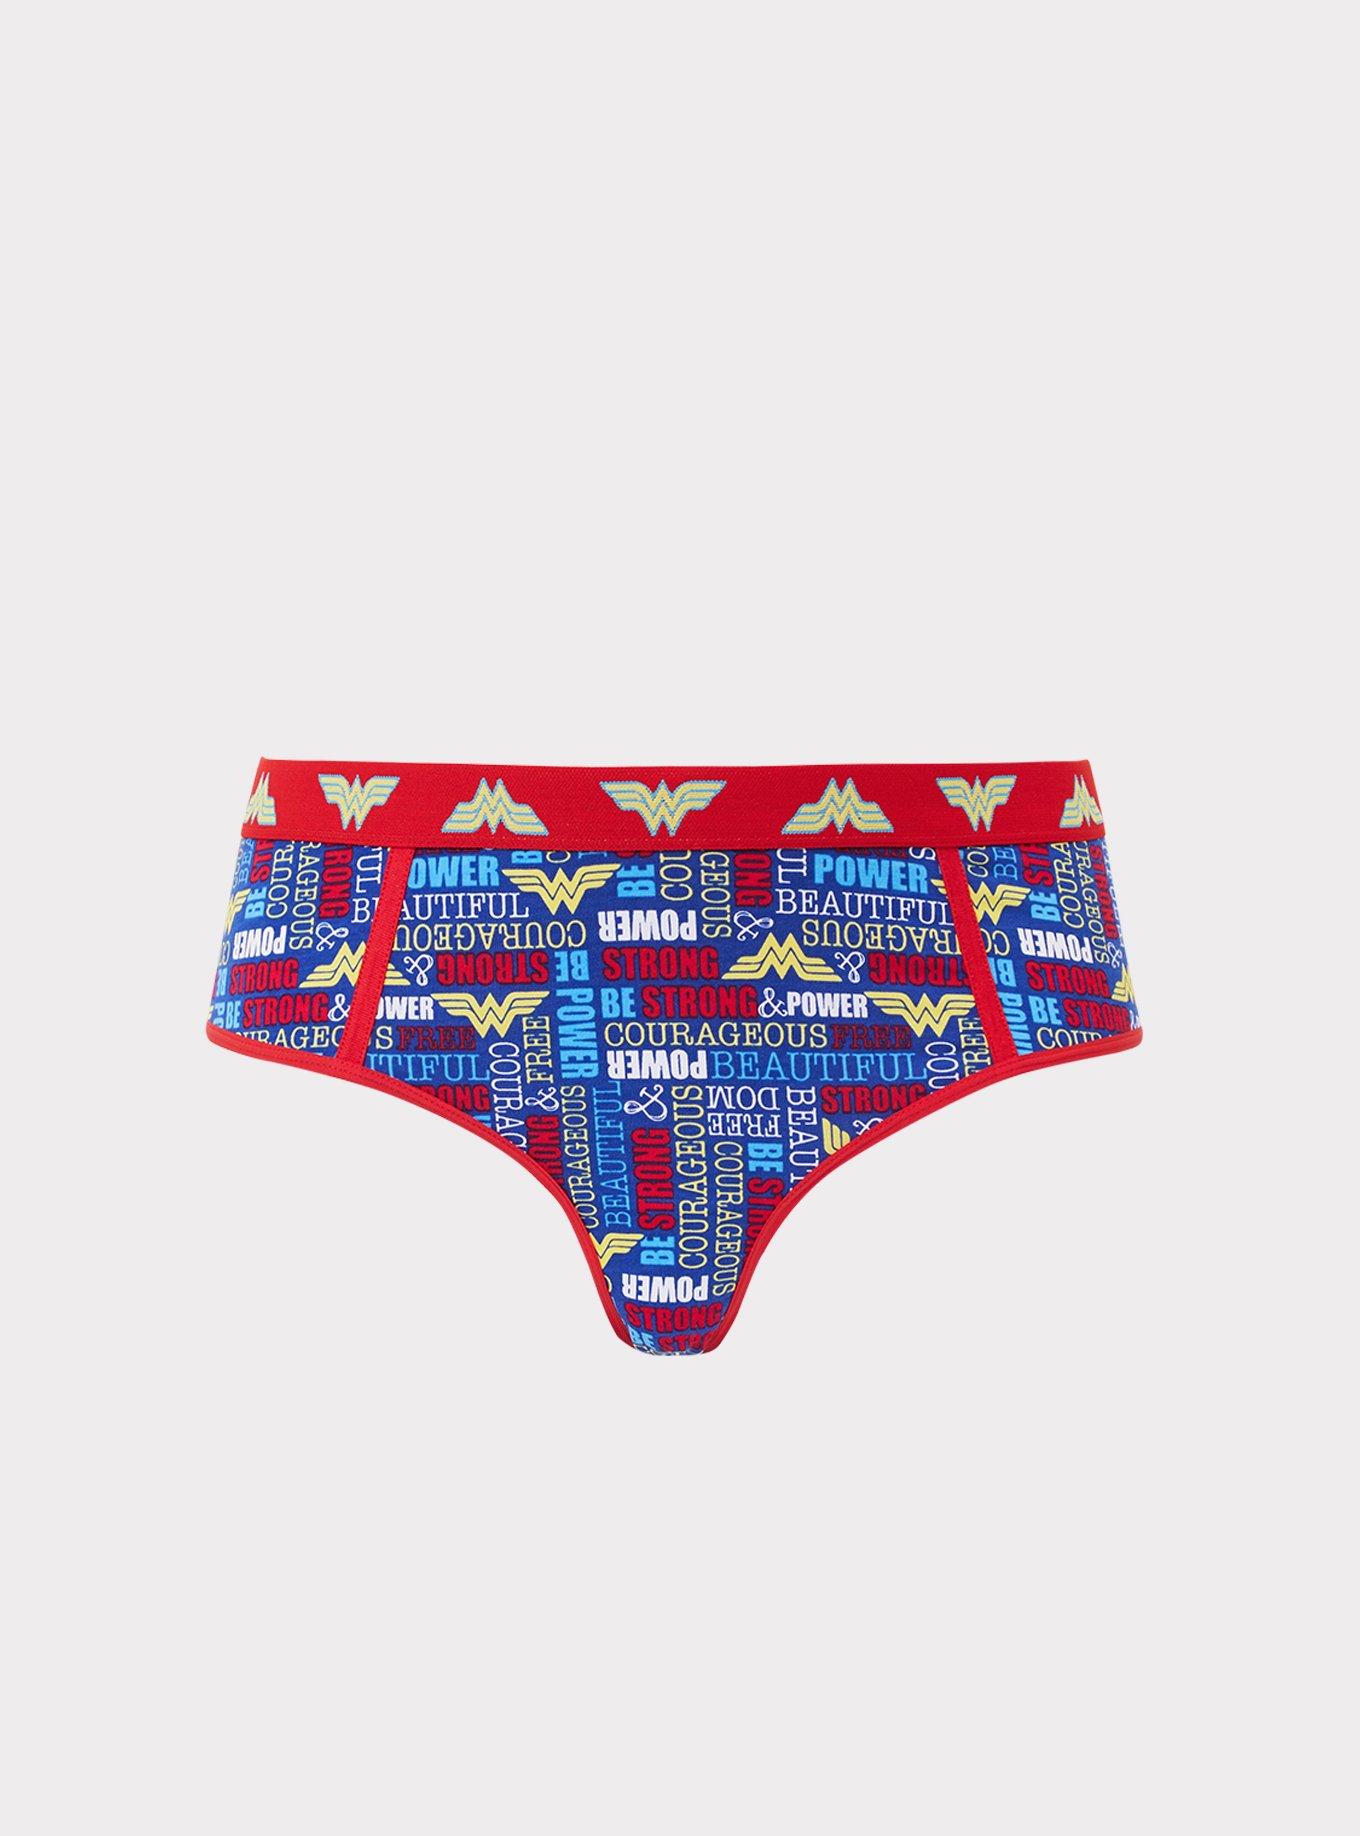 DC Comics, Intimates & Sleepwear, Dc Wonder Woman Panties 3 Pack Cotton  Stretch Hipster Blue Red Gray Stars Small